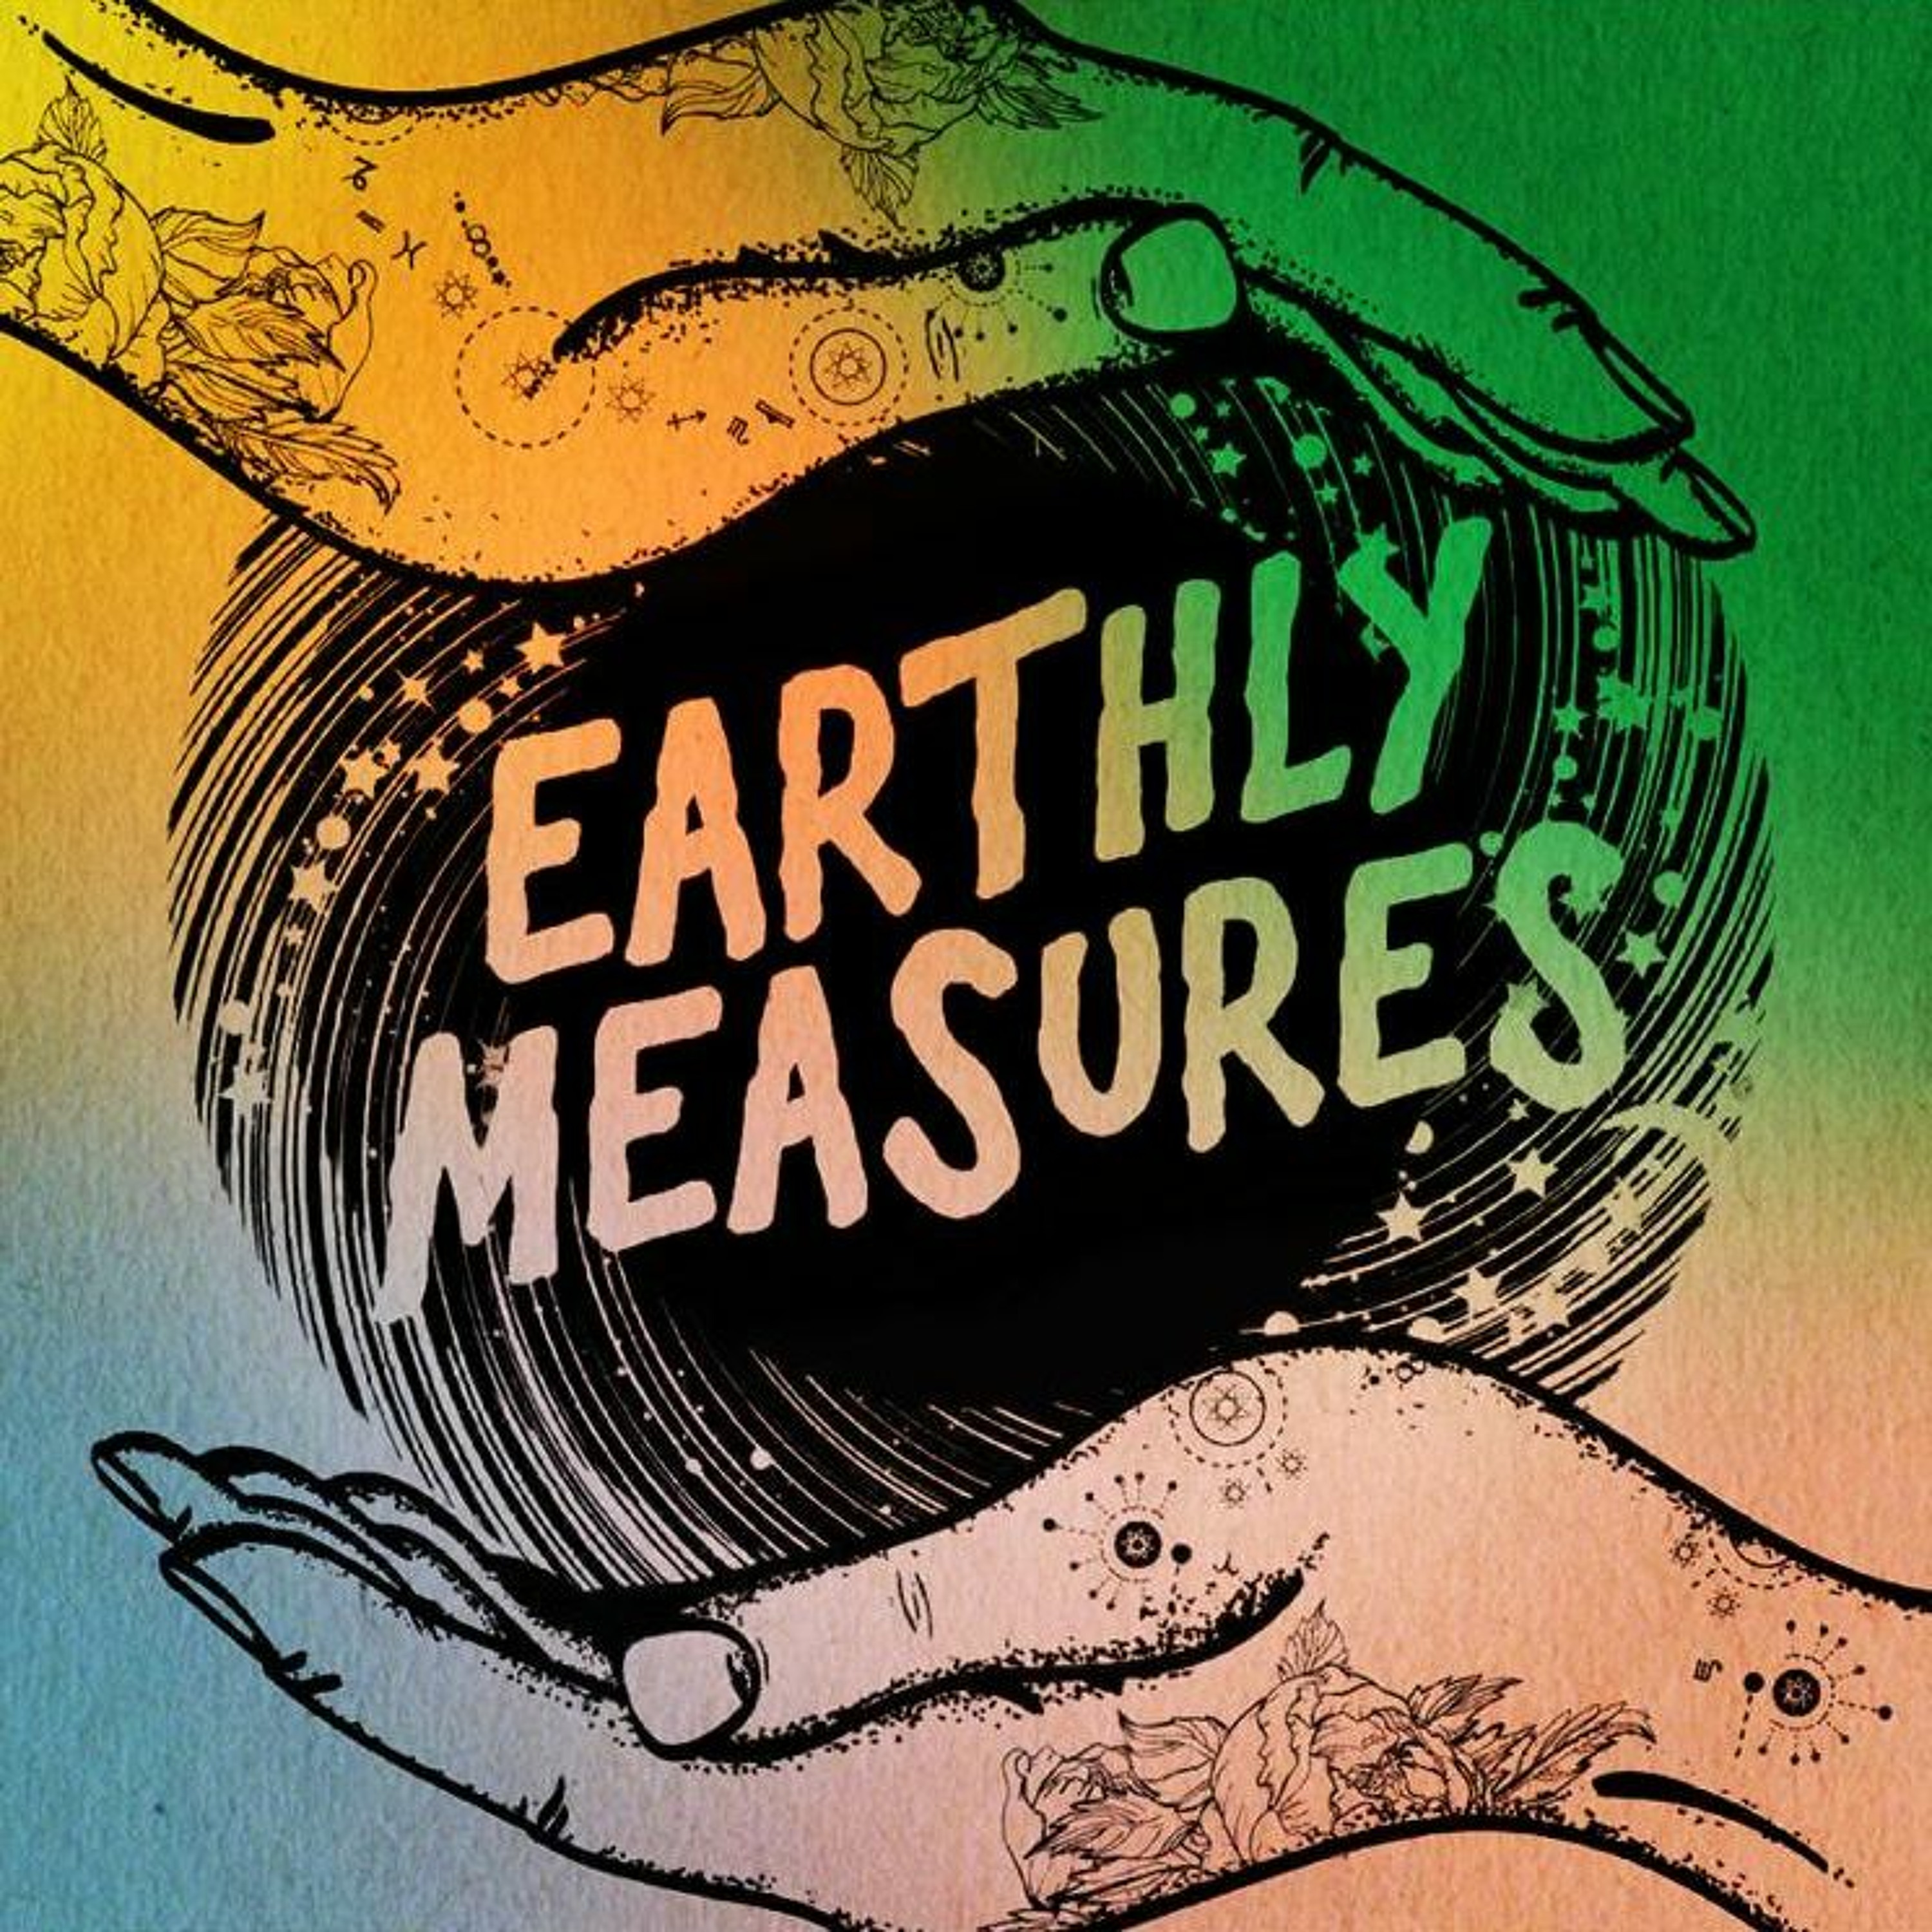 Mix of the Week #408: Earthly Measures